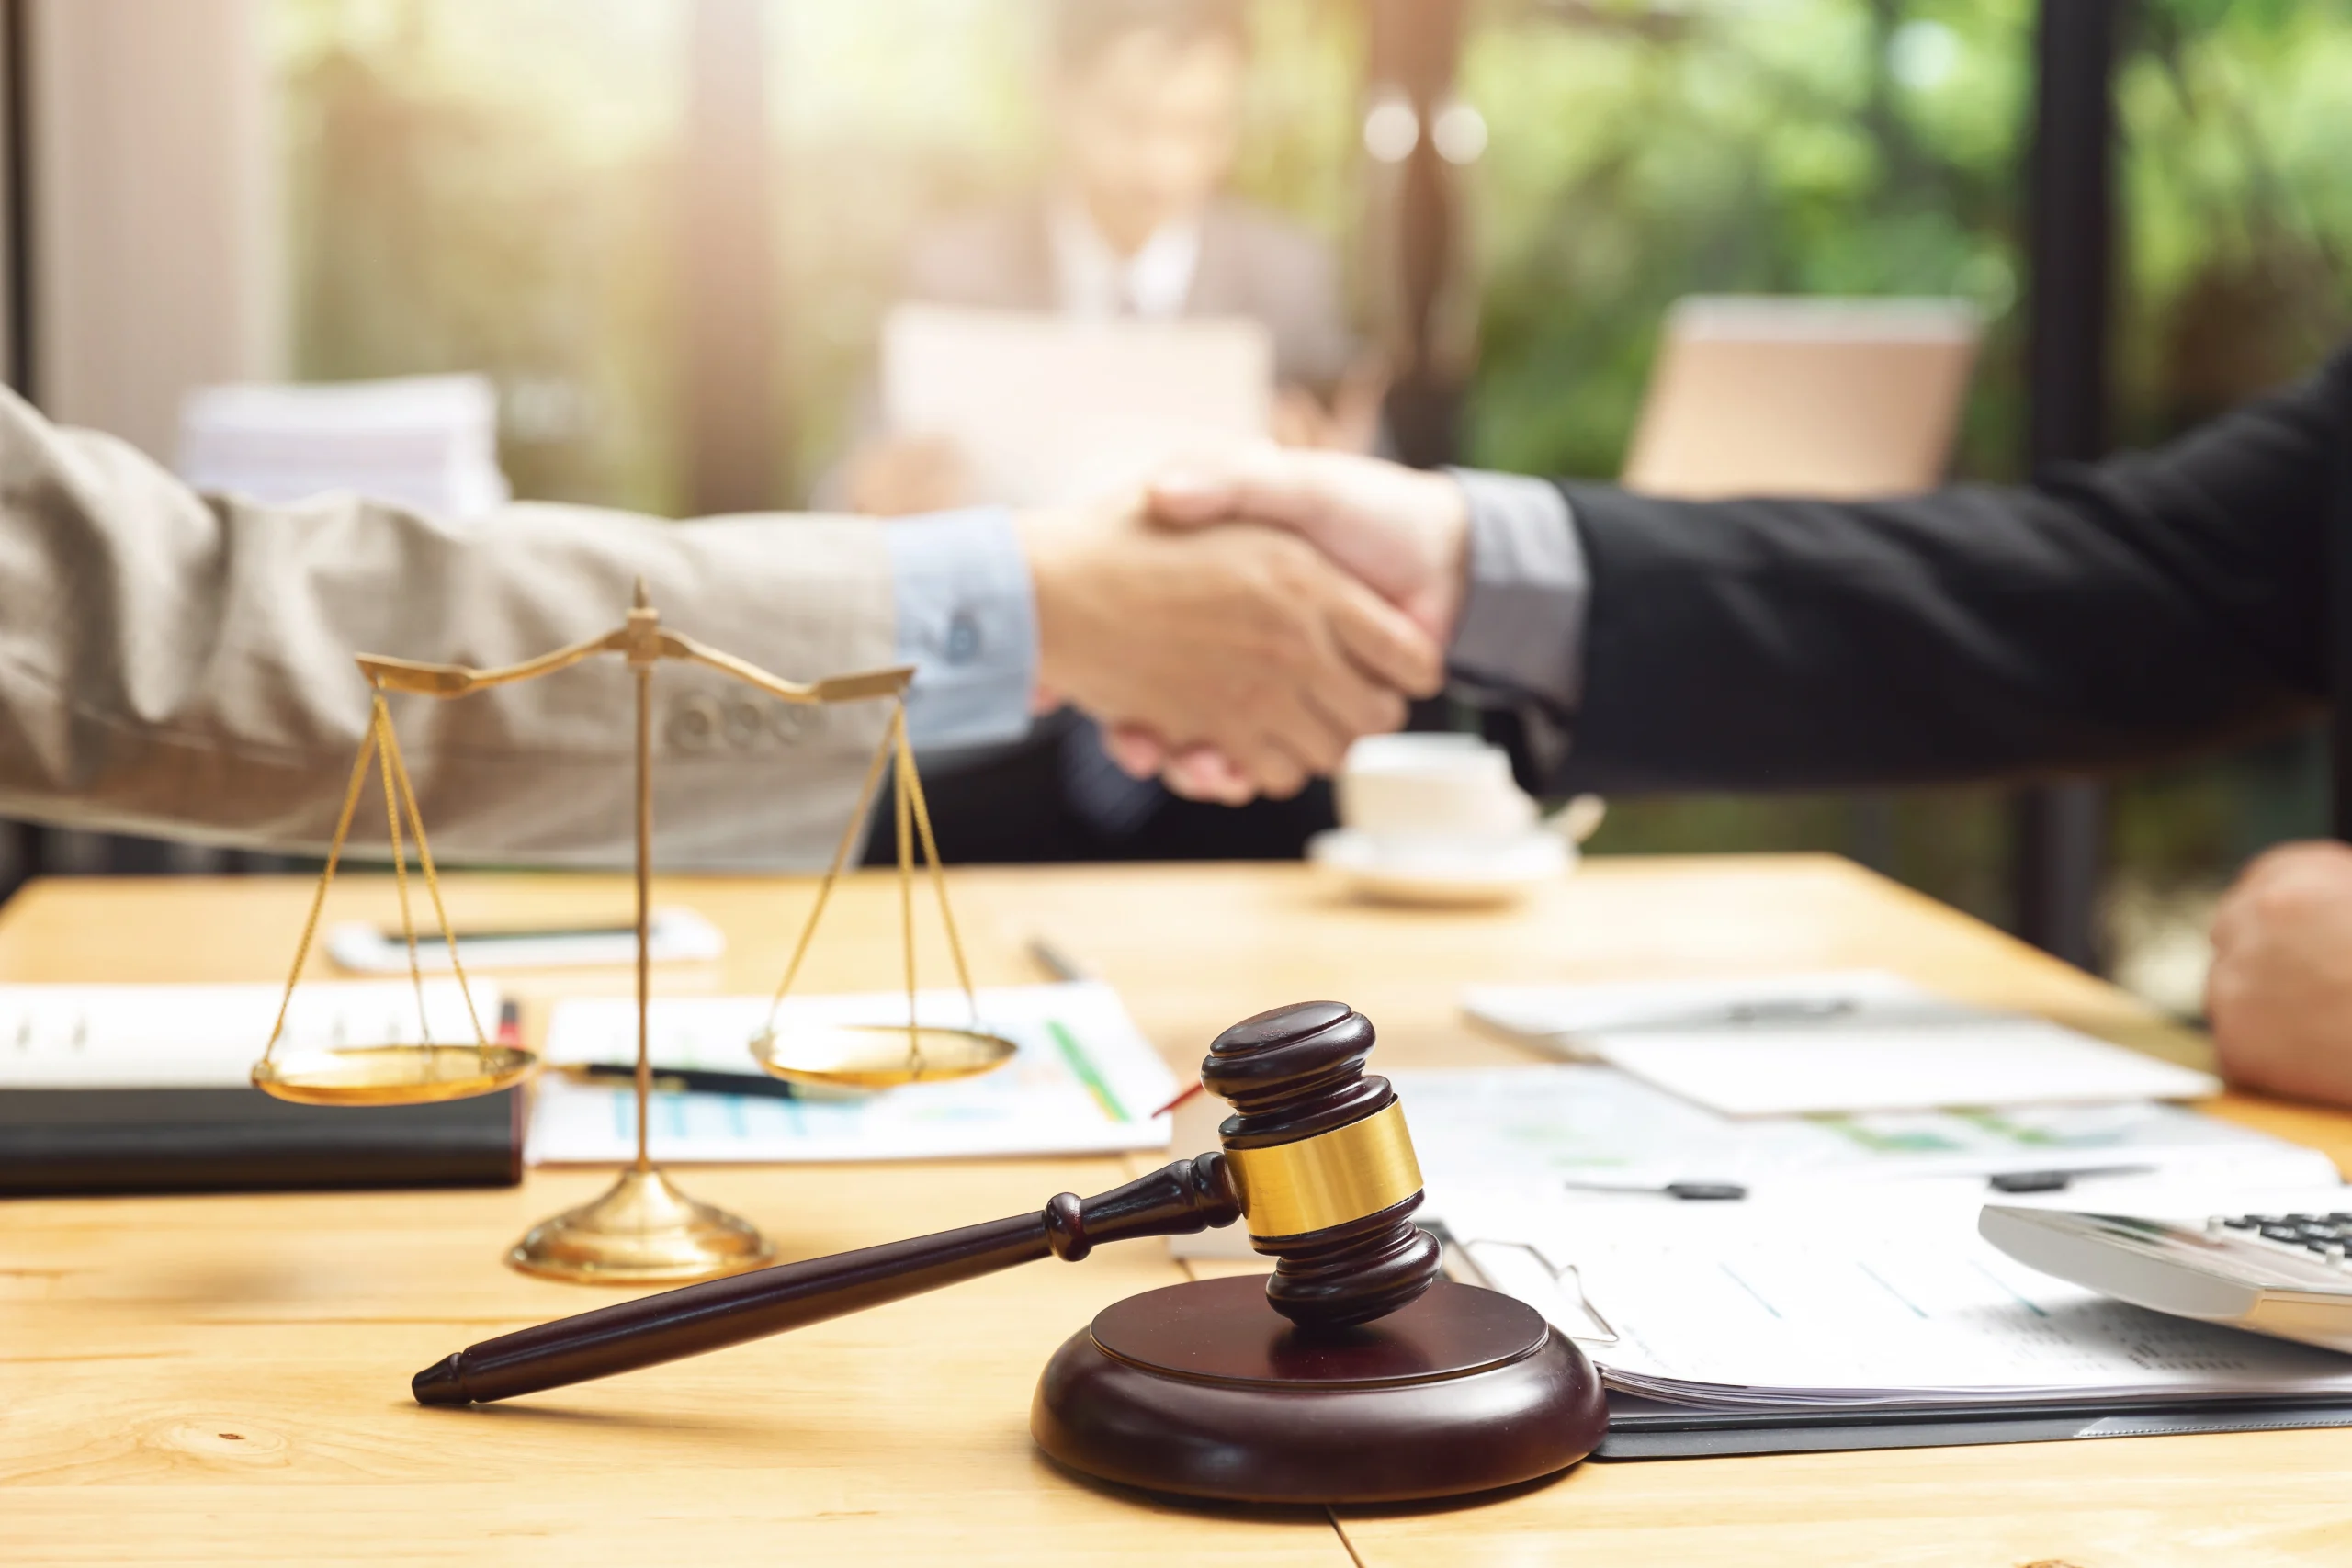 Client shakes lawyers had over table. Our tax attorney in Austin, Texas will fight to protect your rights from IRS tax collection and help you find tax relief or collection alternatives.